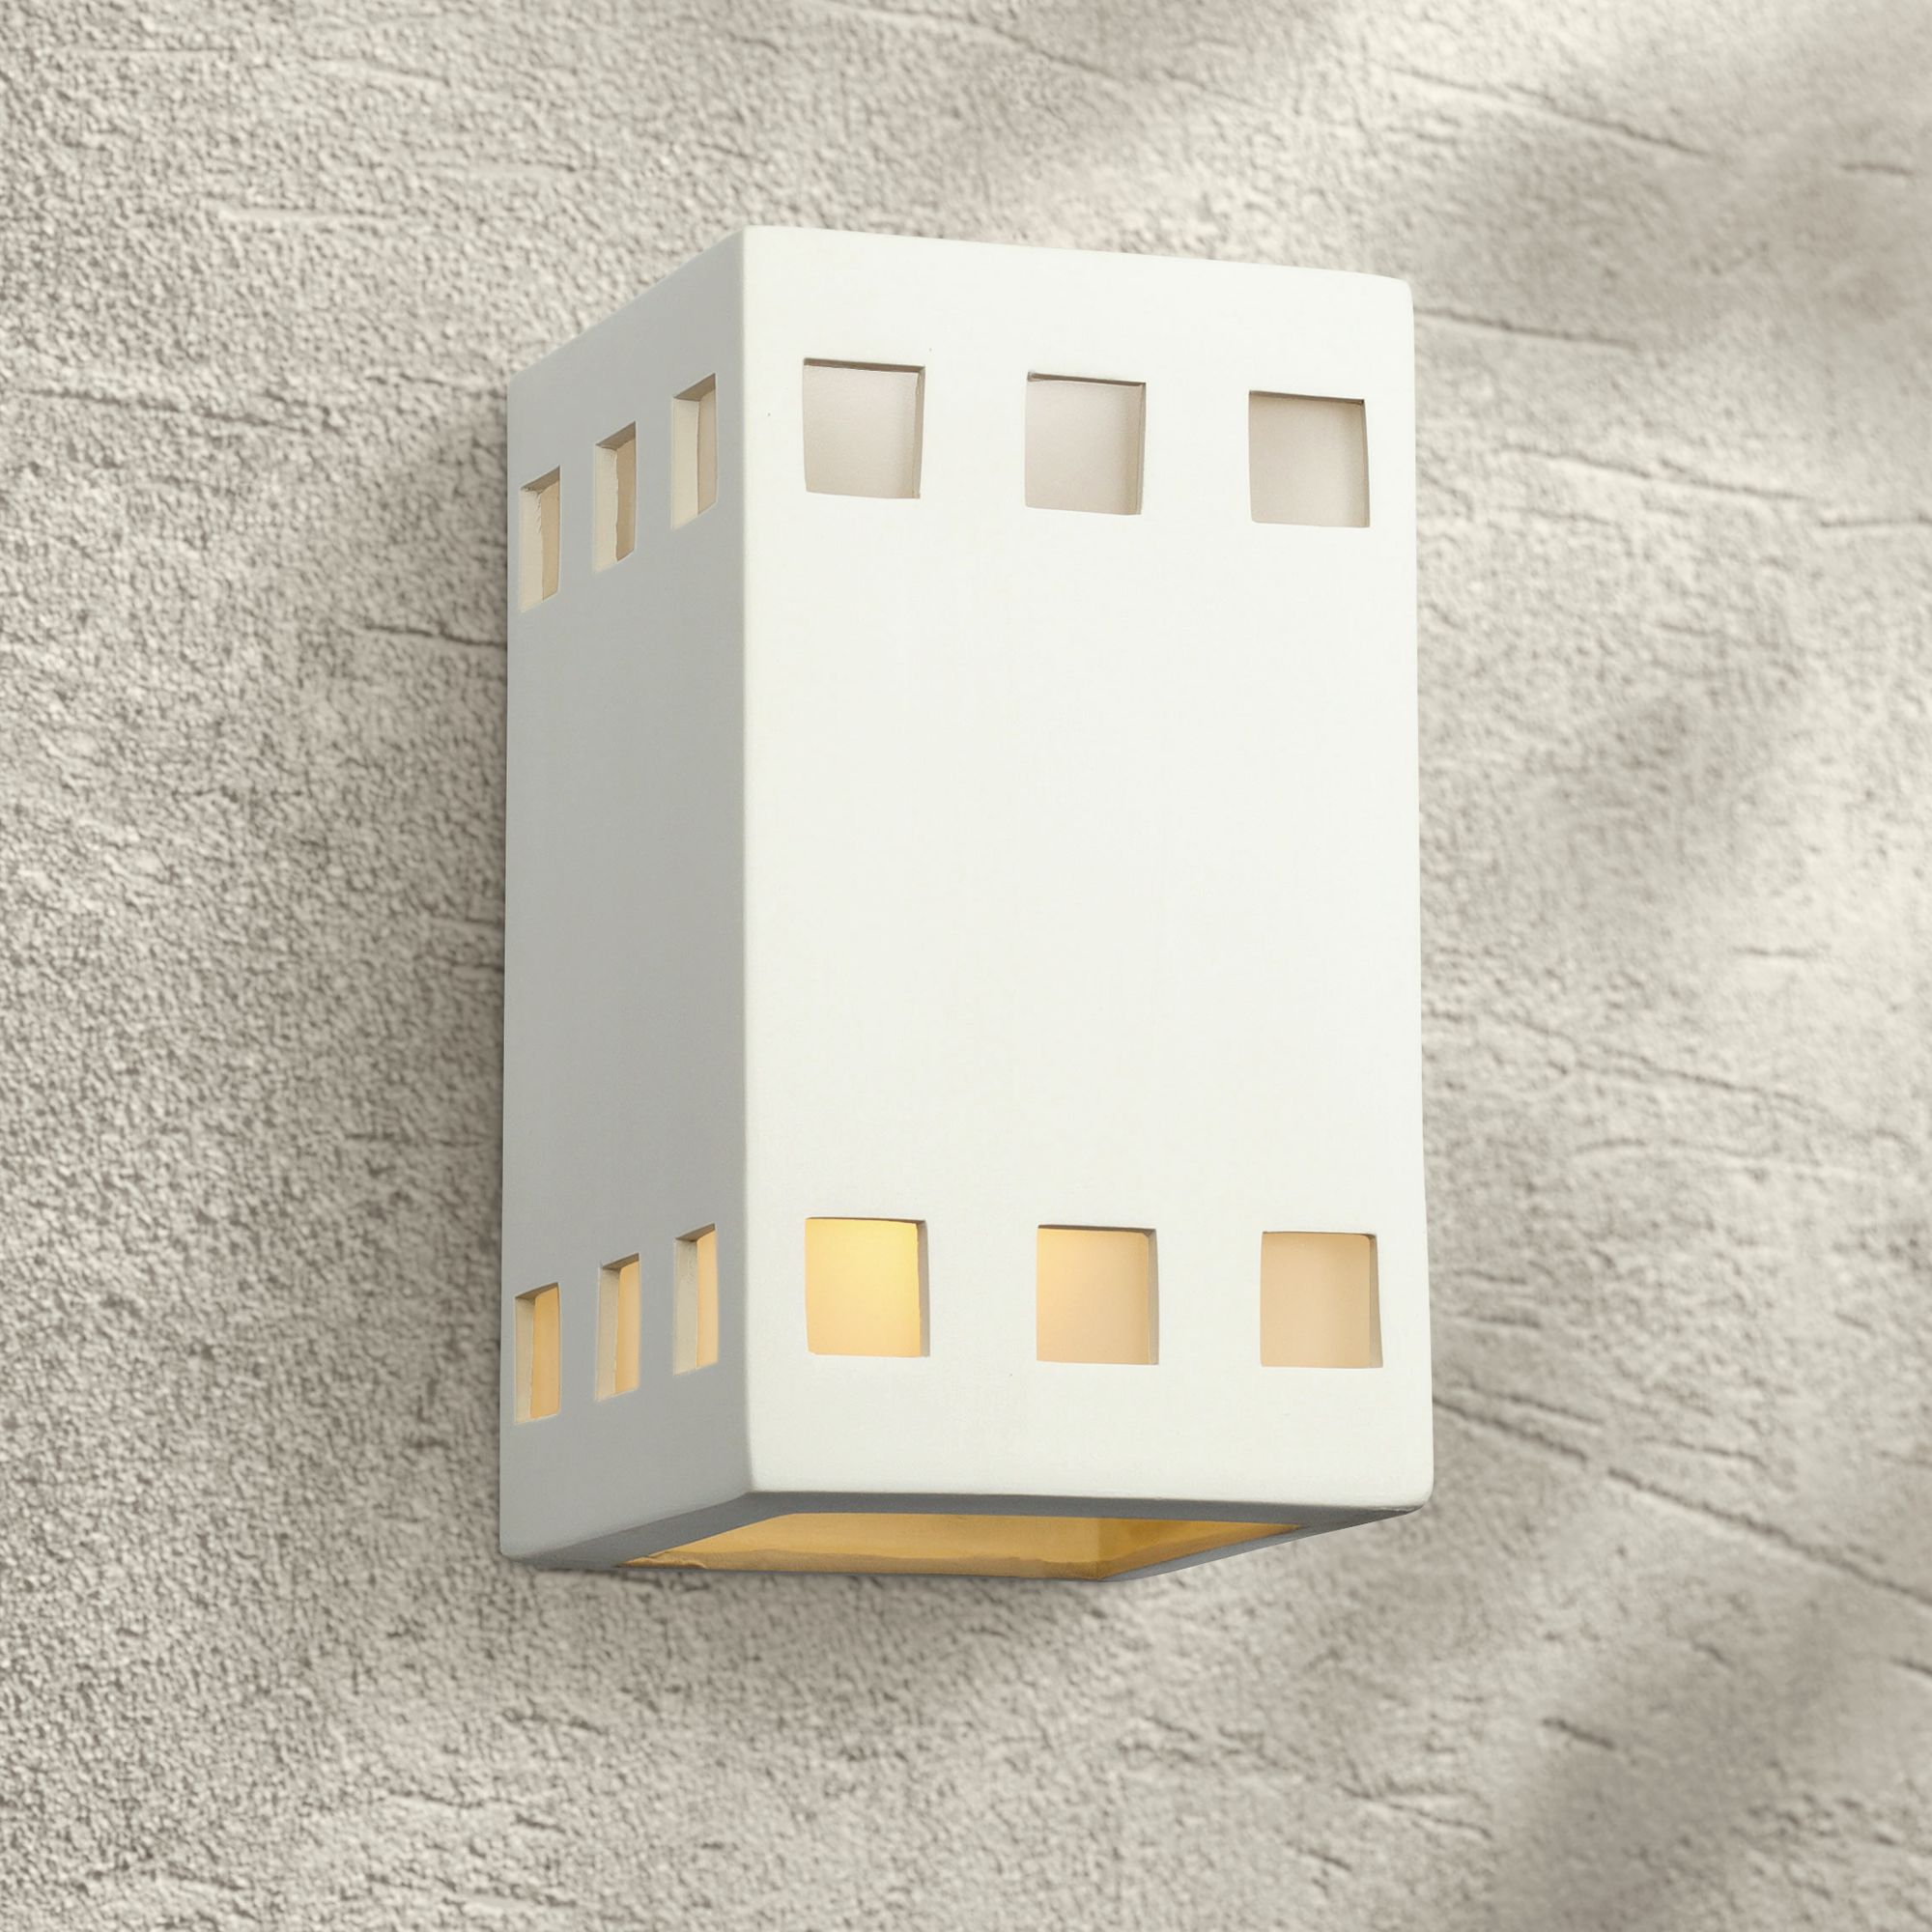 Jaken 9 1/2"H White Row of Squares LED Outdoor Wall Light